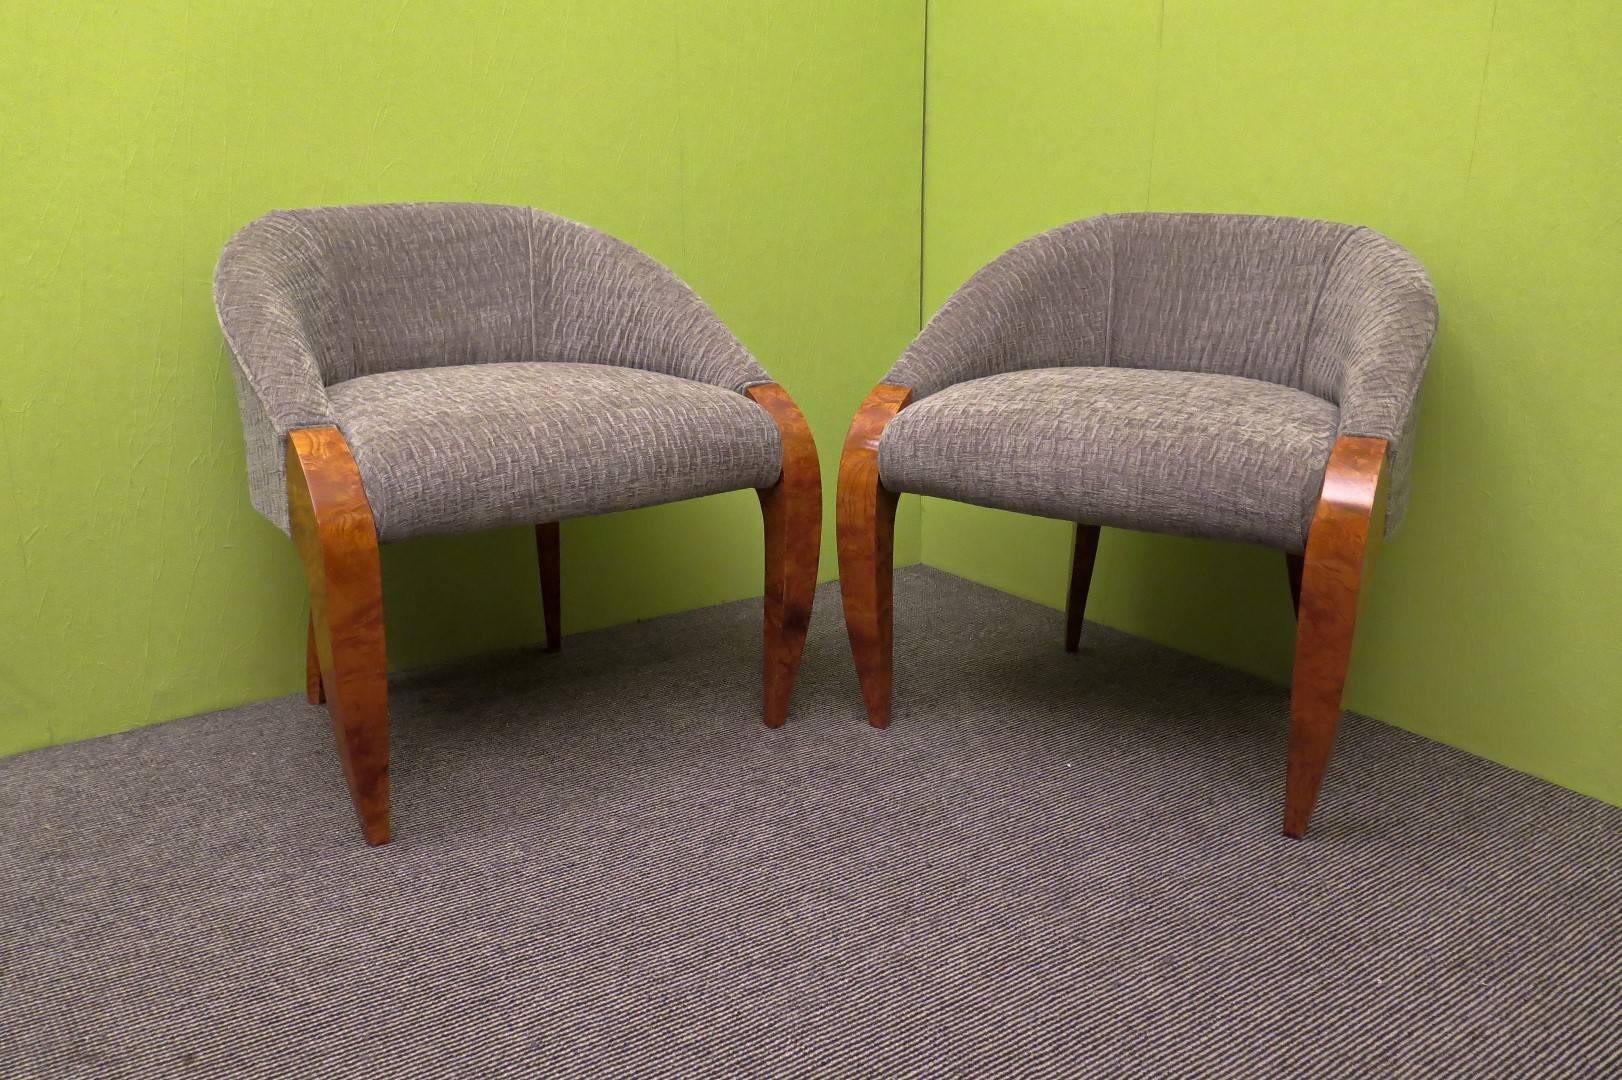 Two stupendous armchairs Austrian, the briar root ash for this pair of armchairs. The coating is fine gray velvet. Really very elegant the design of these chairs.